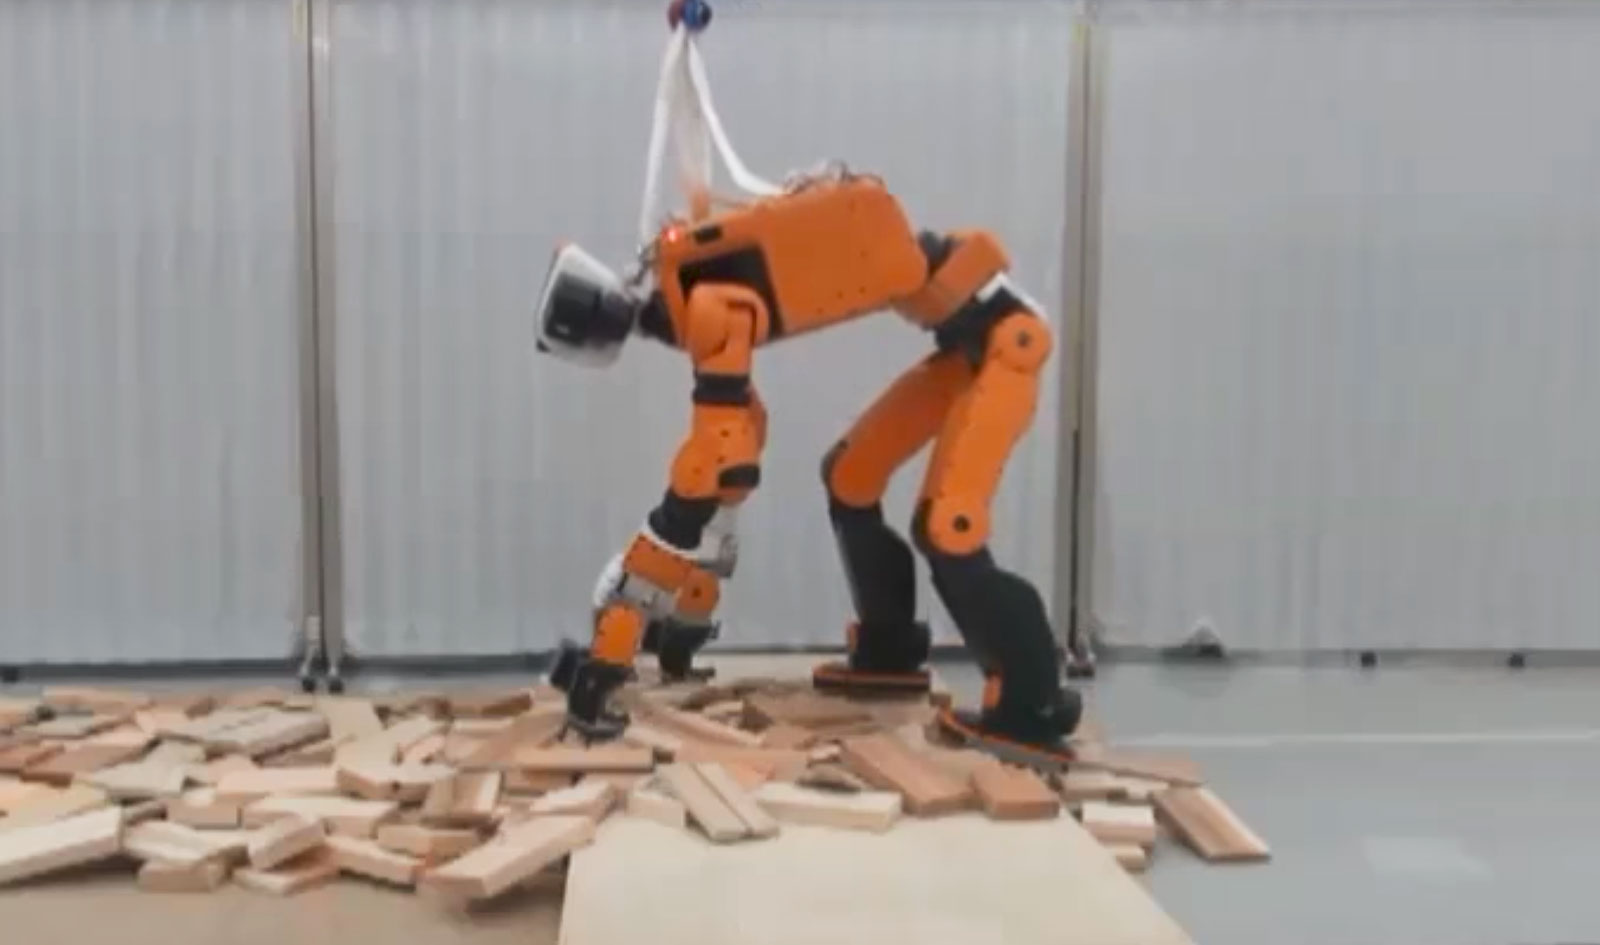 Honda S Disaster Recovery Robot Can Climb Ladders Engadget